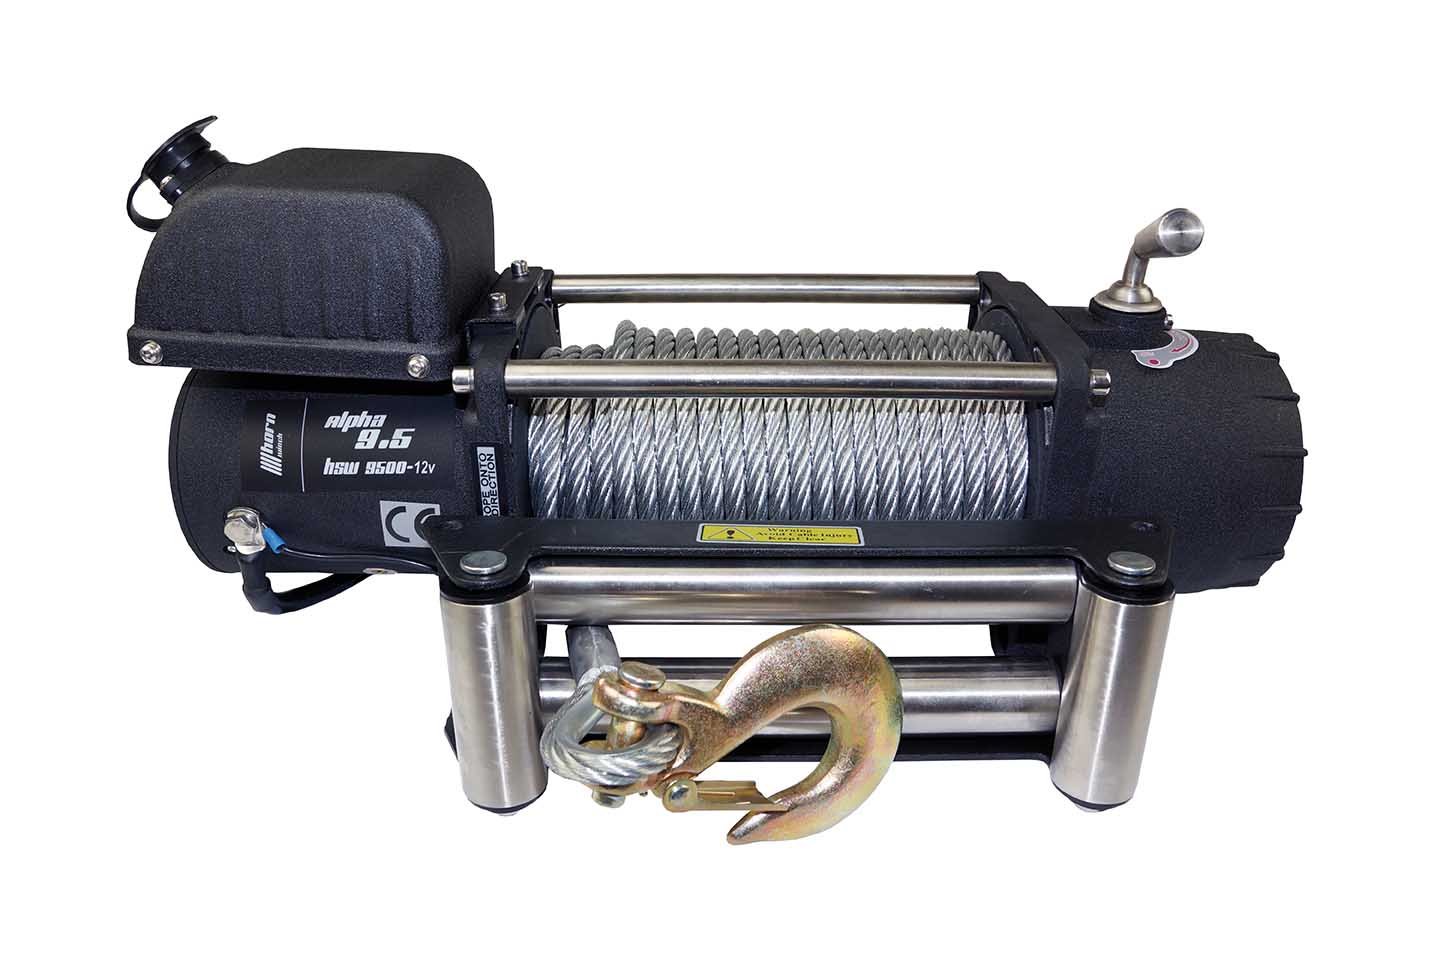 ▷ Horntools Alpha 9.5 winch - available here!  Nakatanenga 4x4-Equipment  for Land Rover, Offroad & Outdoor